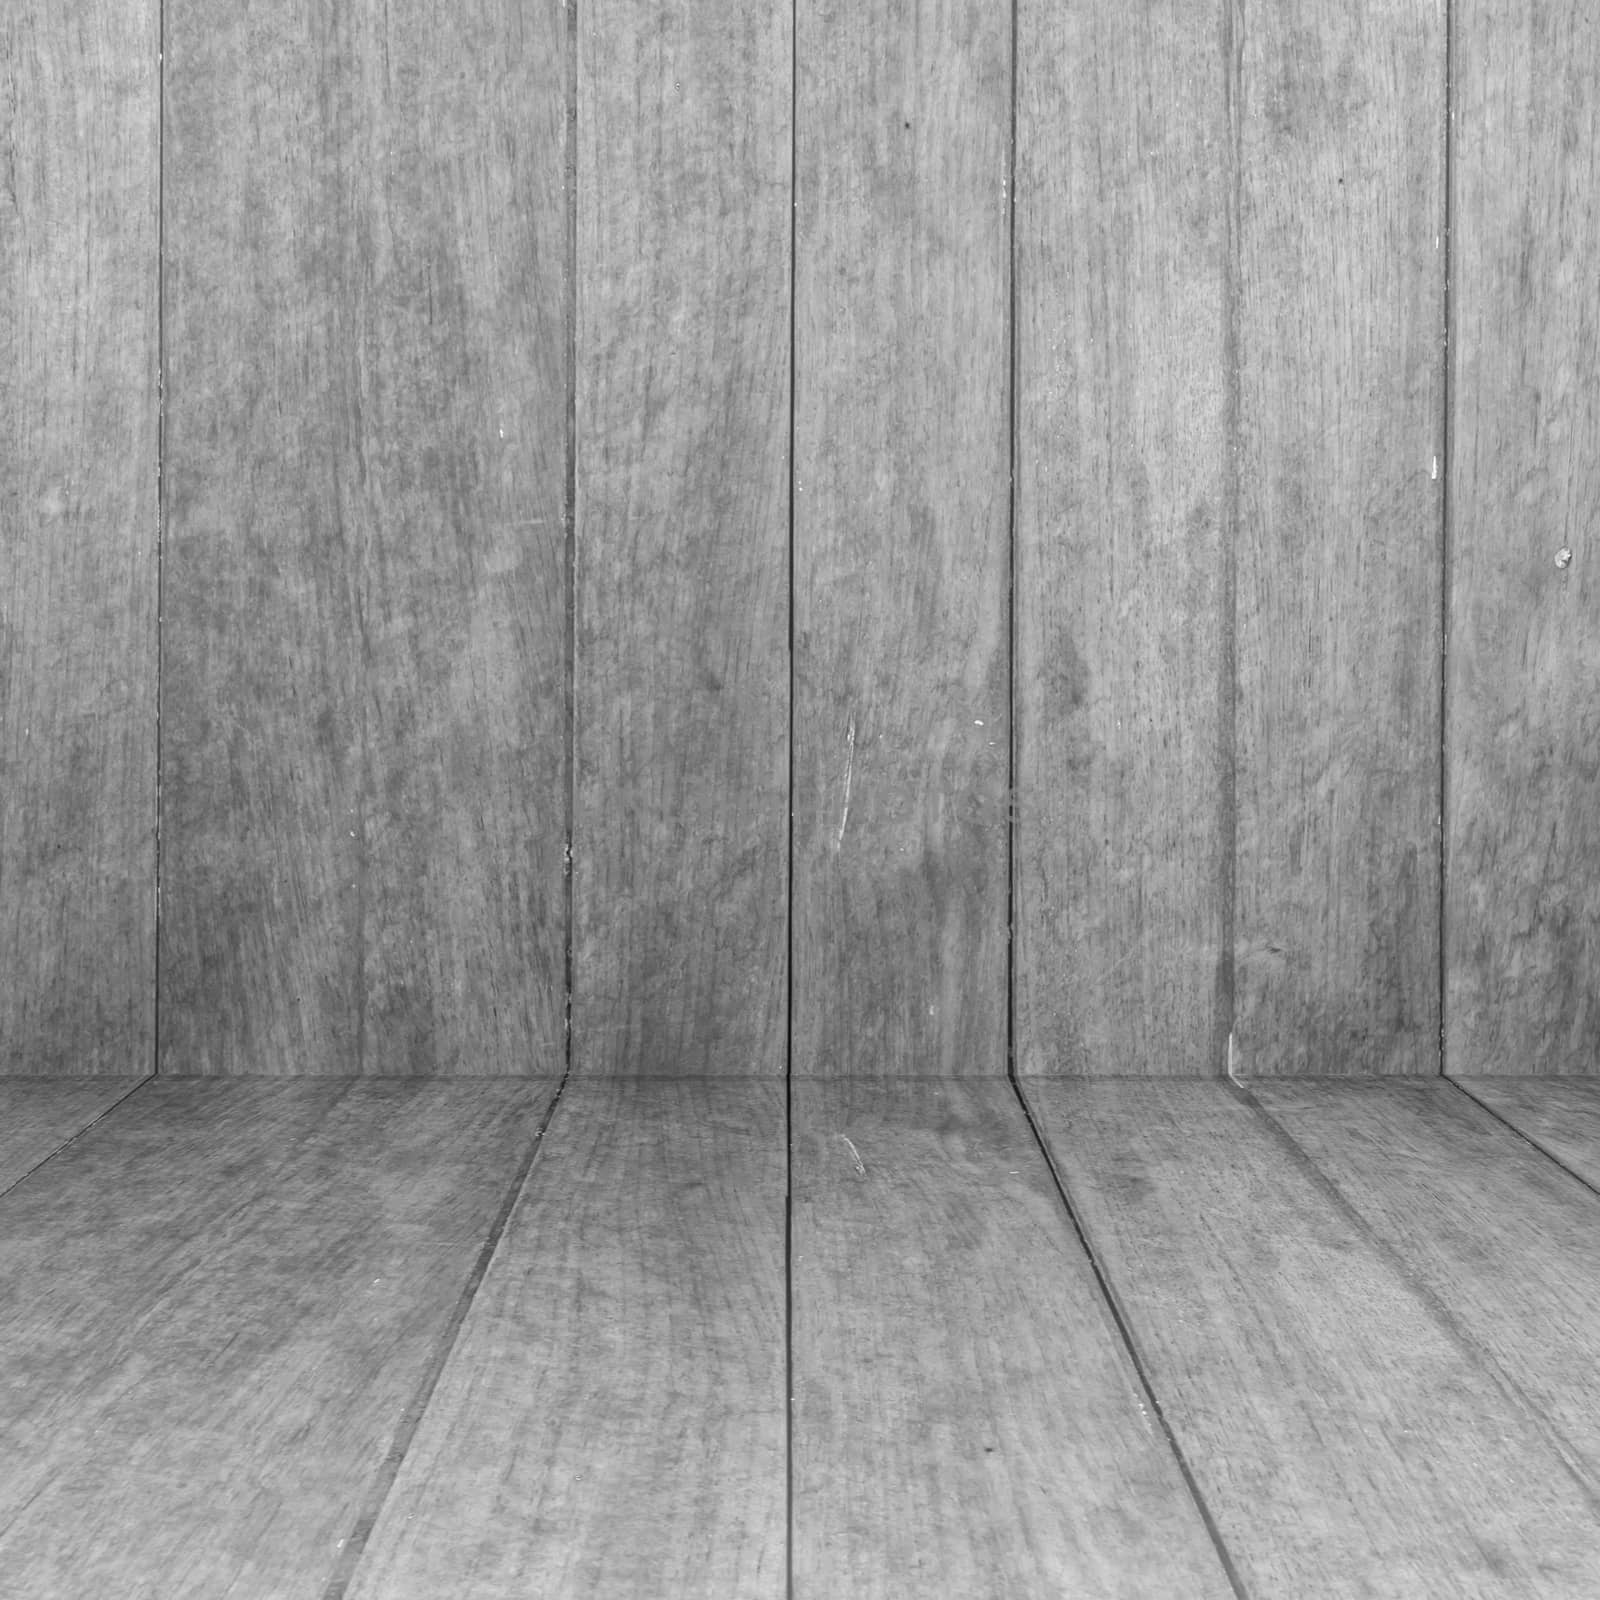 Perspective white wooden floor with wood panel background by punsayaporn